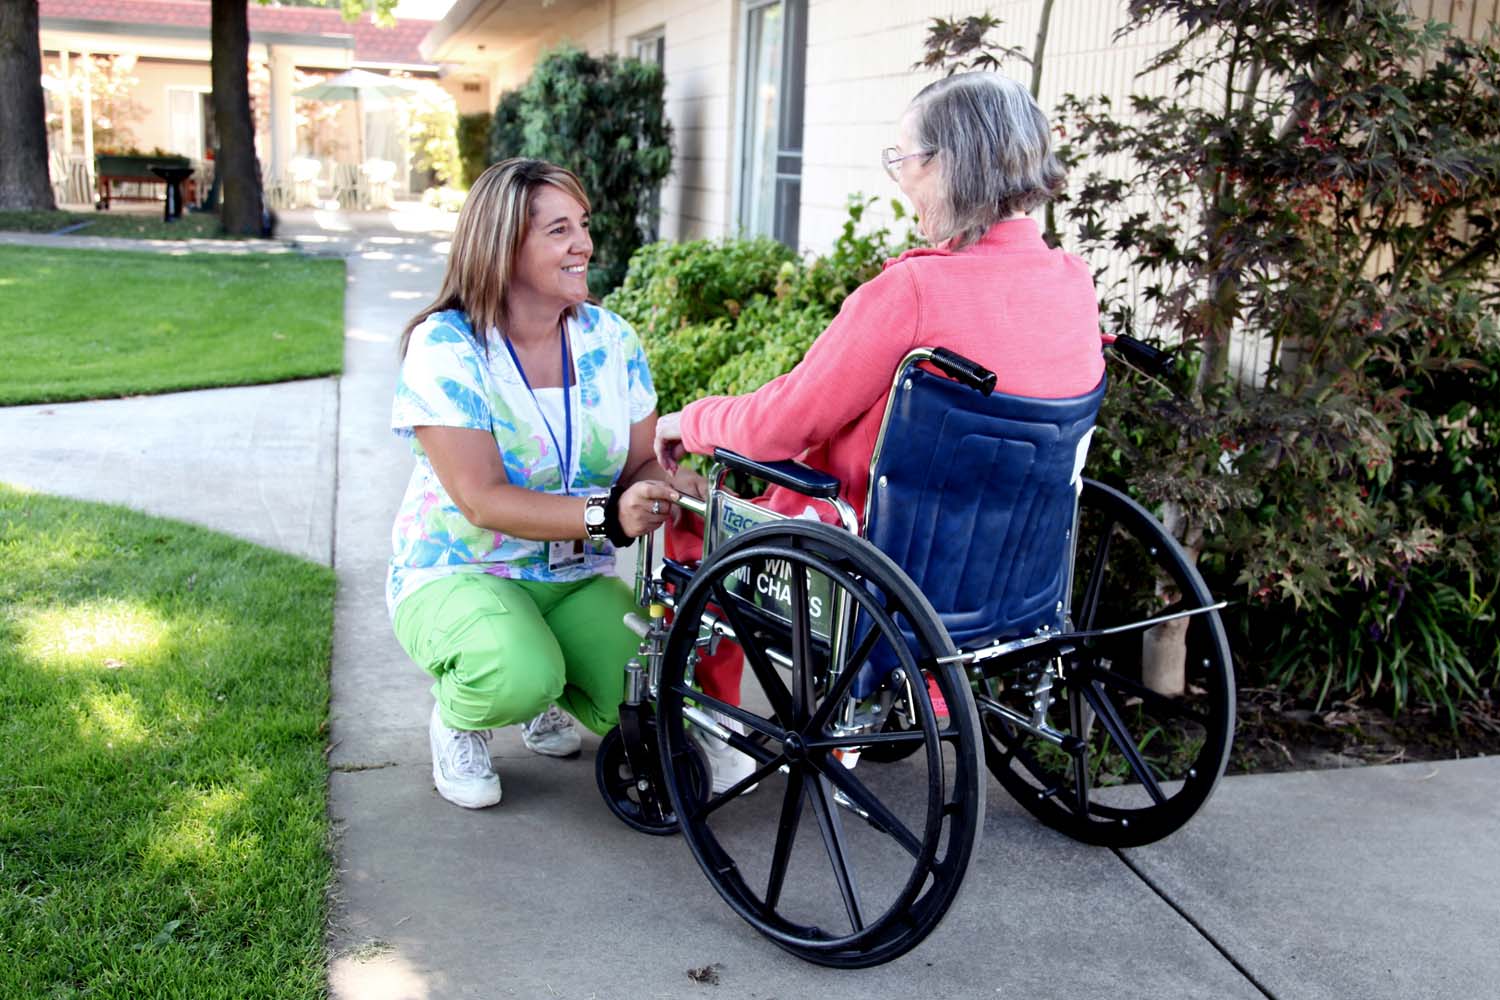 Nurse squatting and smiling at person in wheel chair